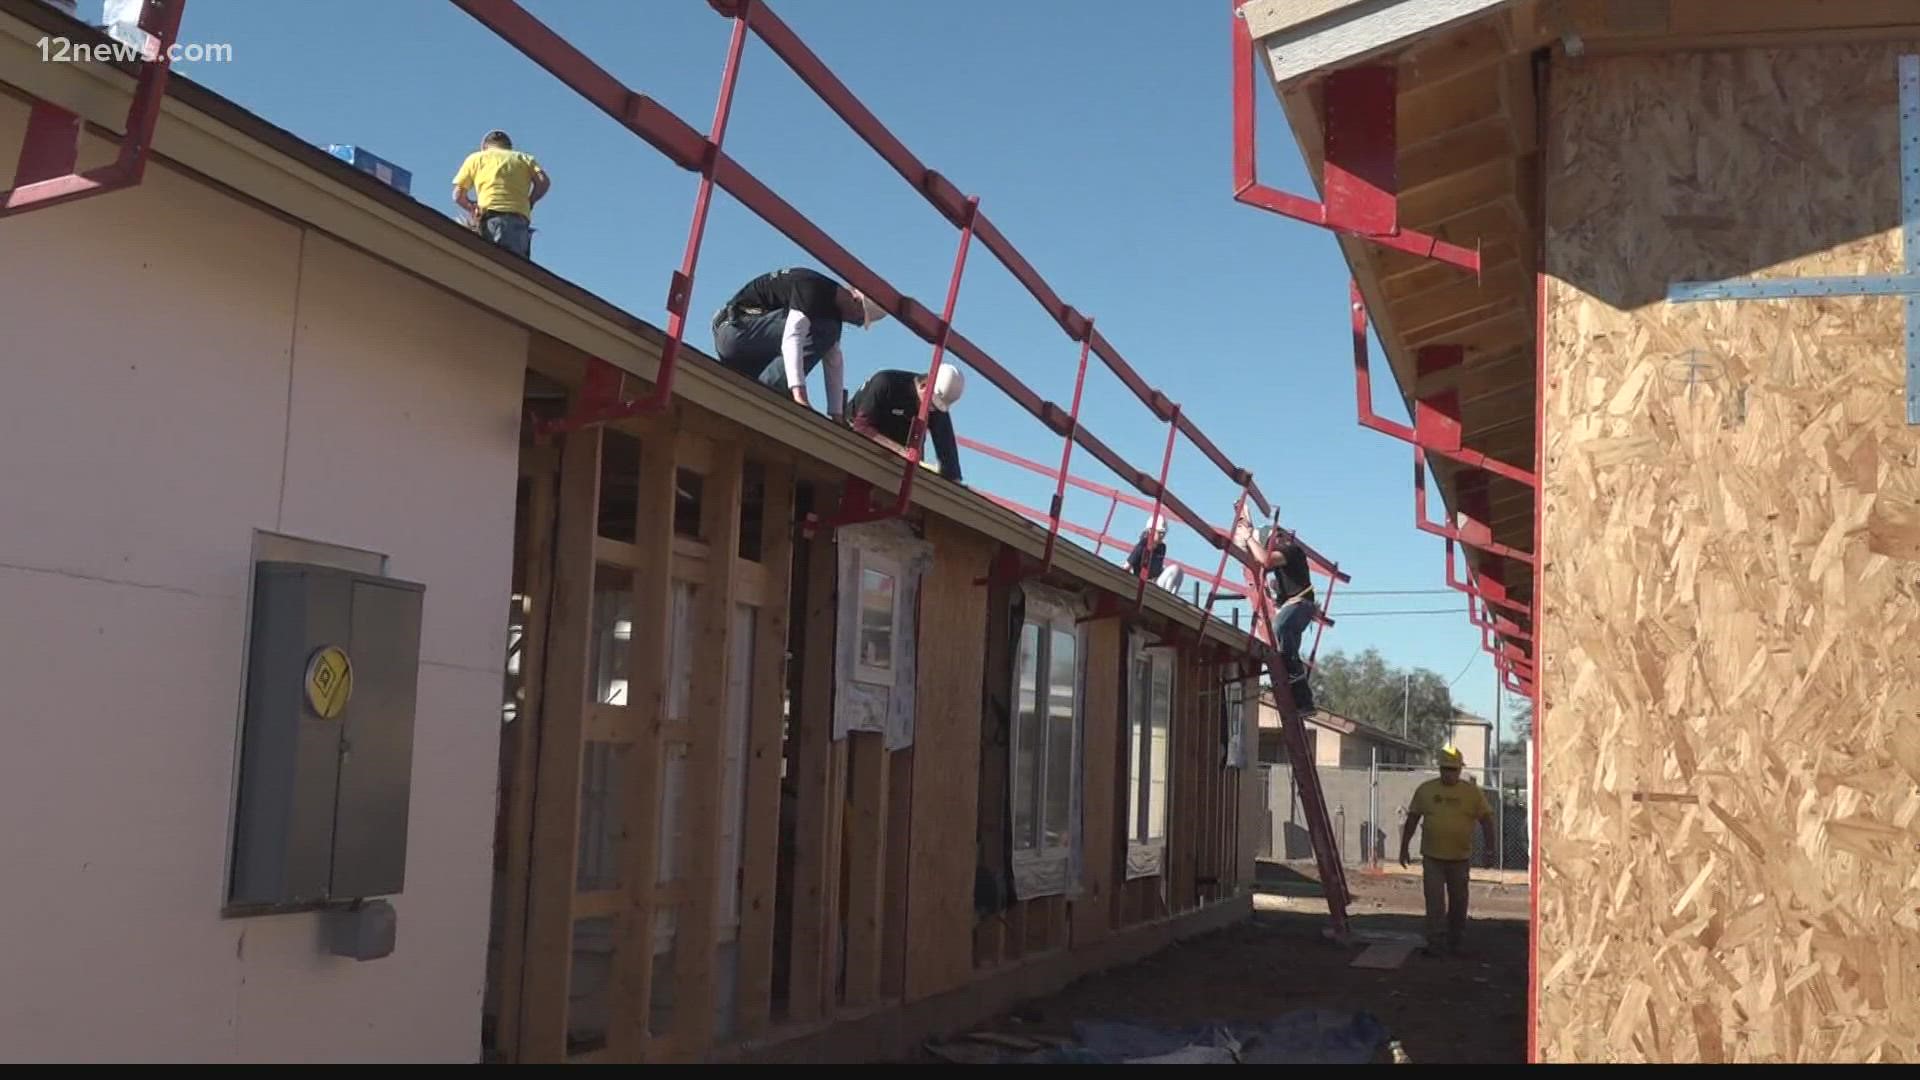 Phoenix Marines spent their Saturday morning and afternoon helping those in need by teaming up with Habitat for Humanity to build homes.